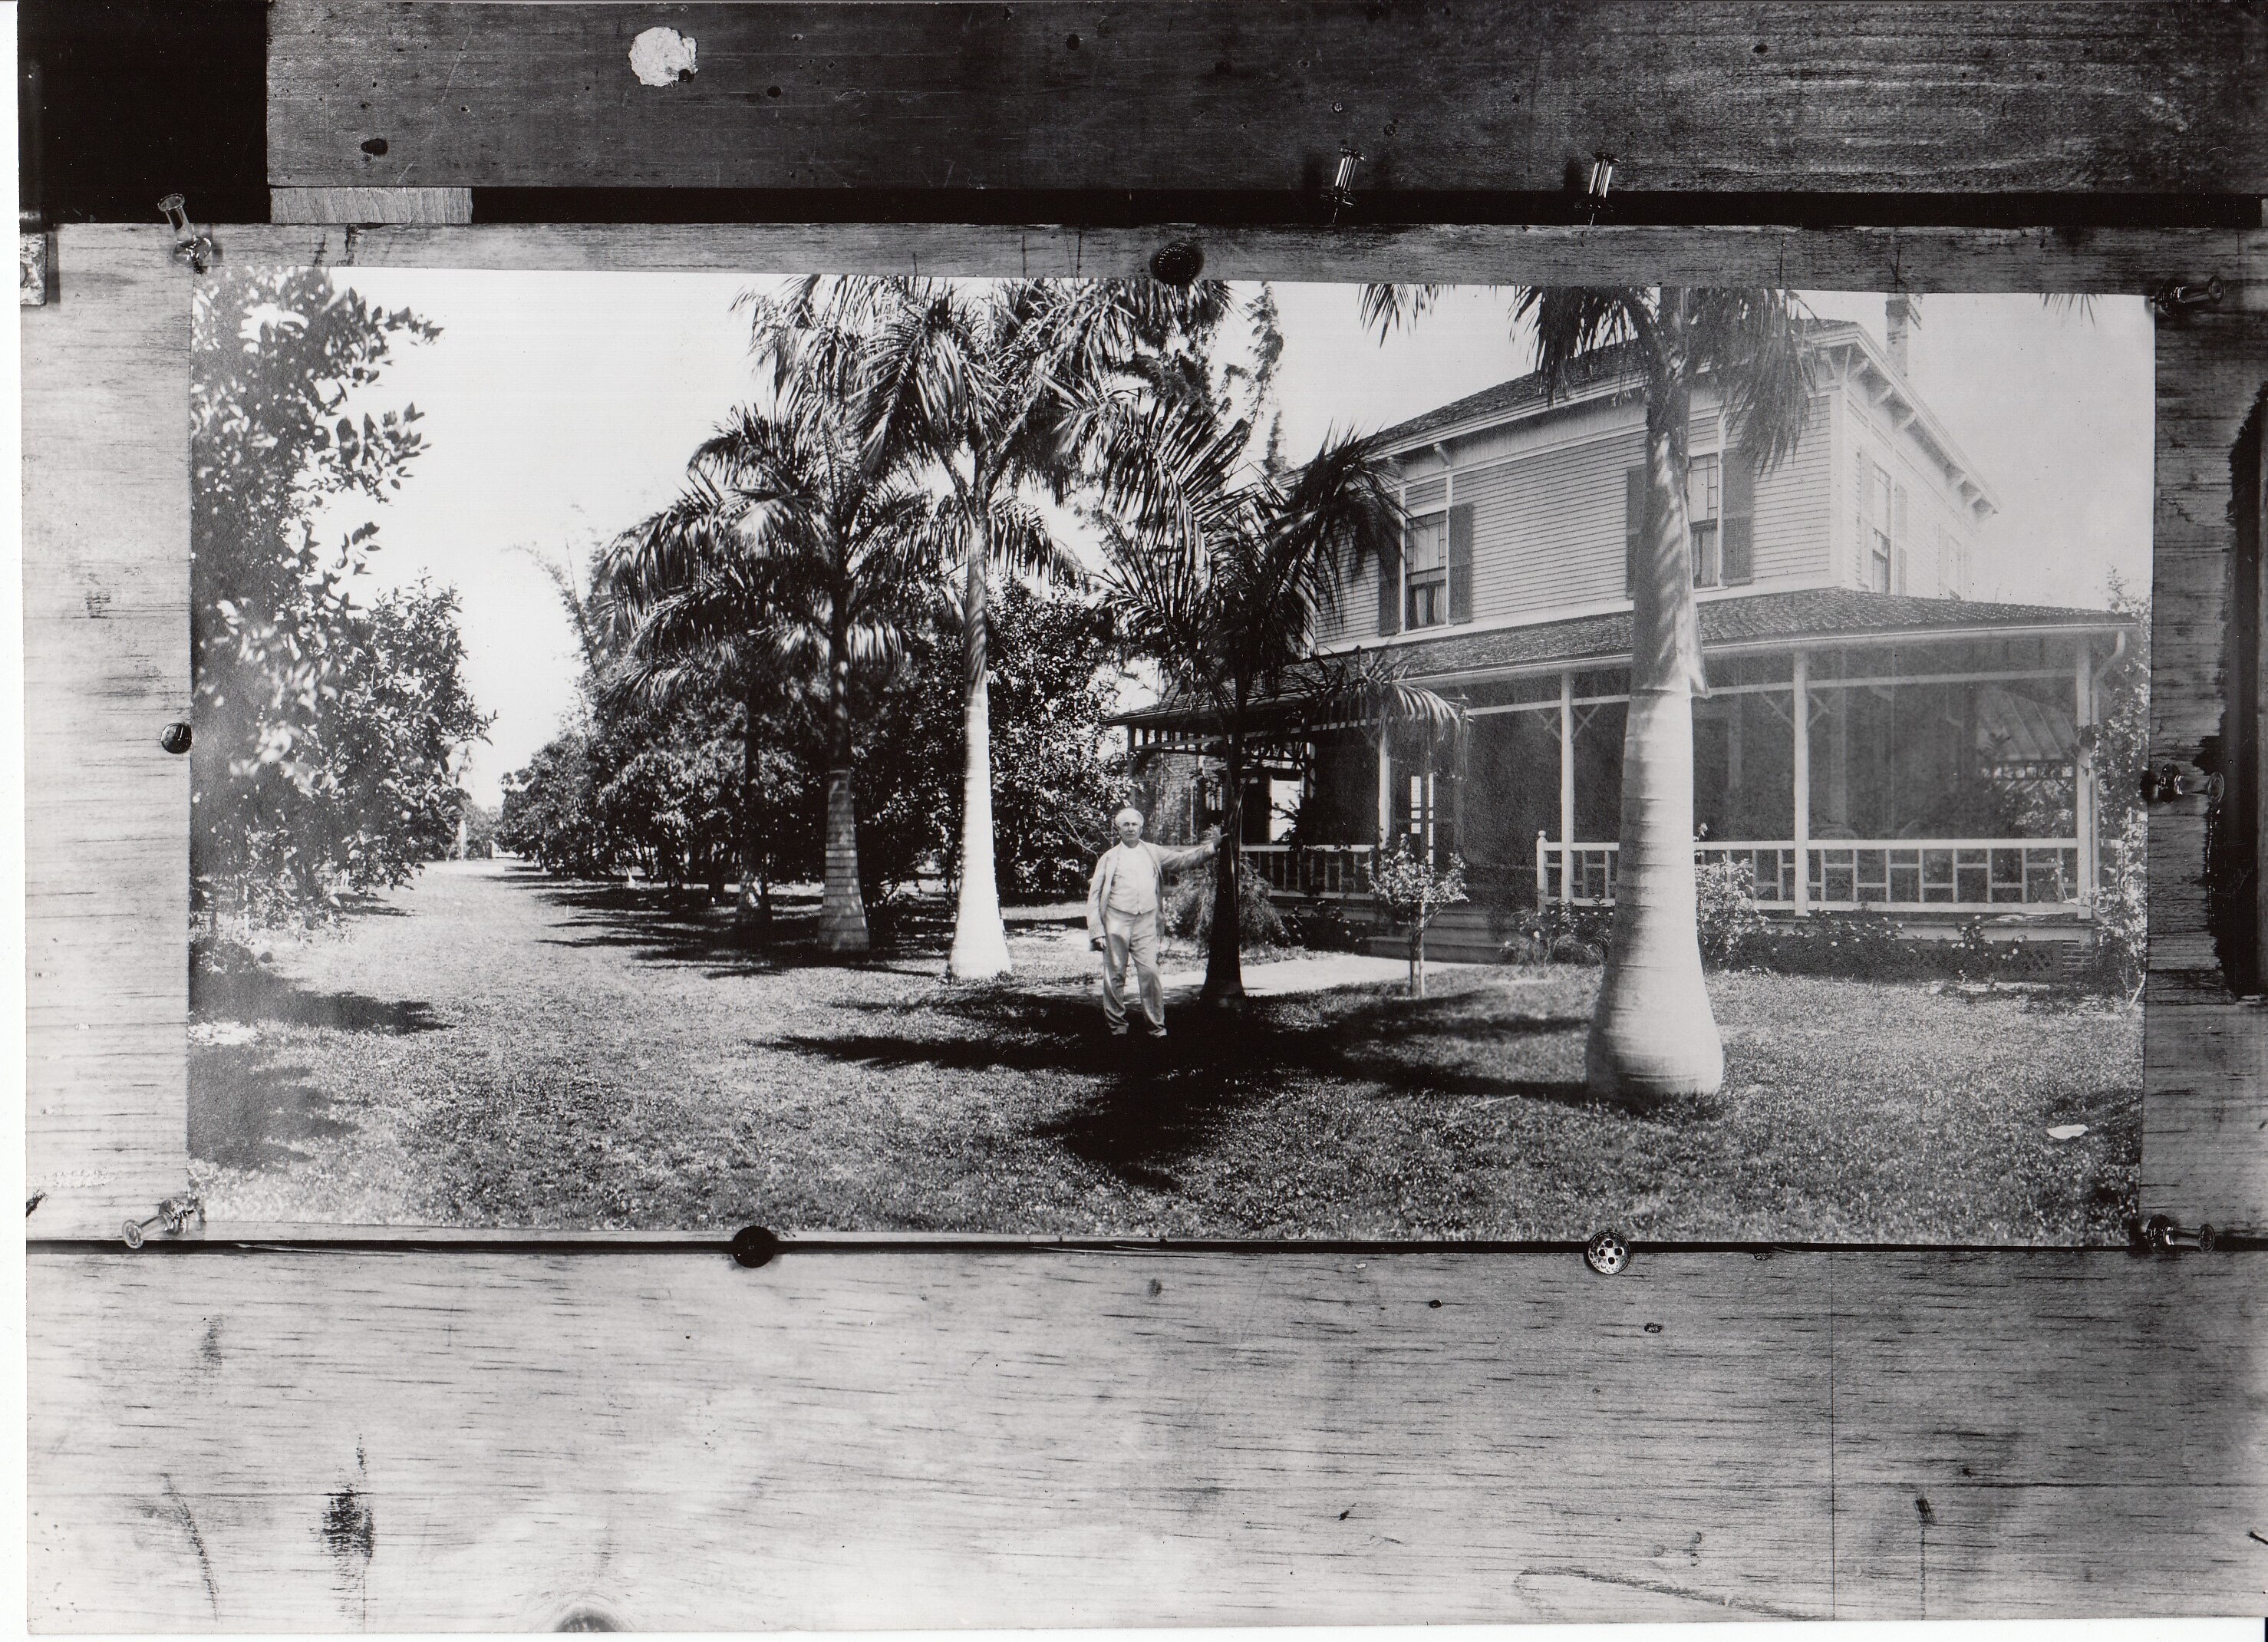 Thomas Edison in front of his Florida house.